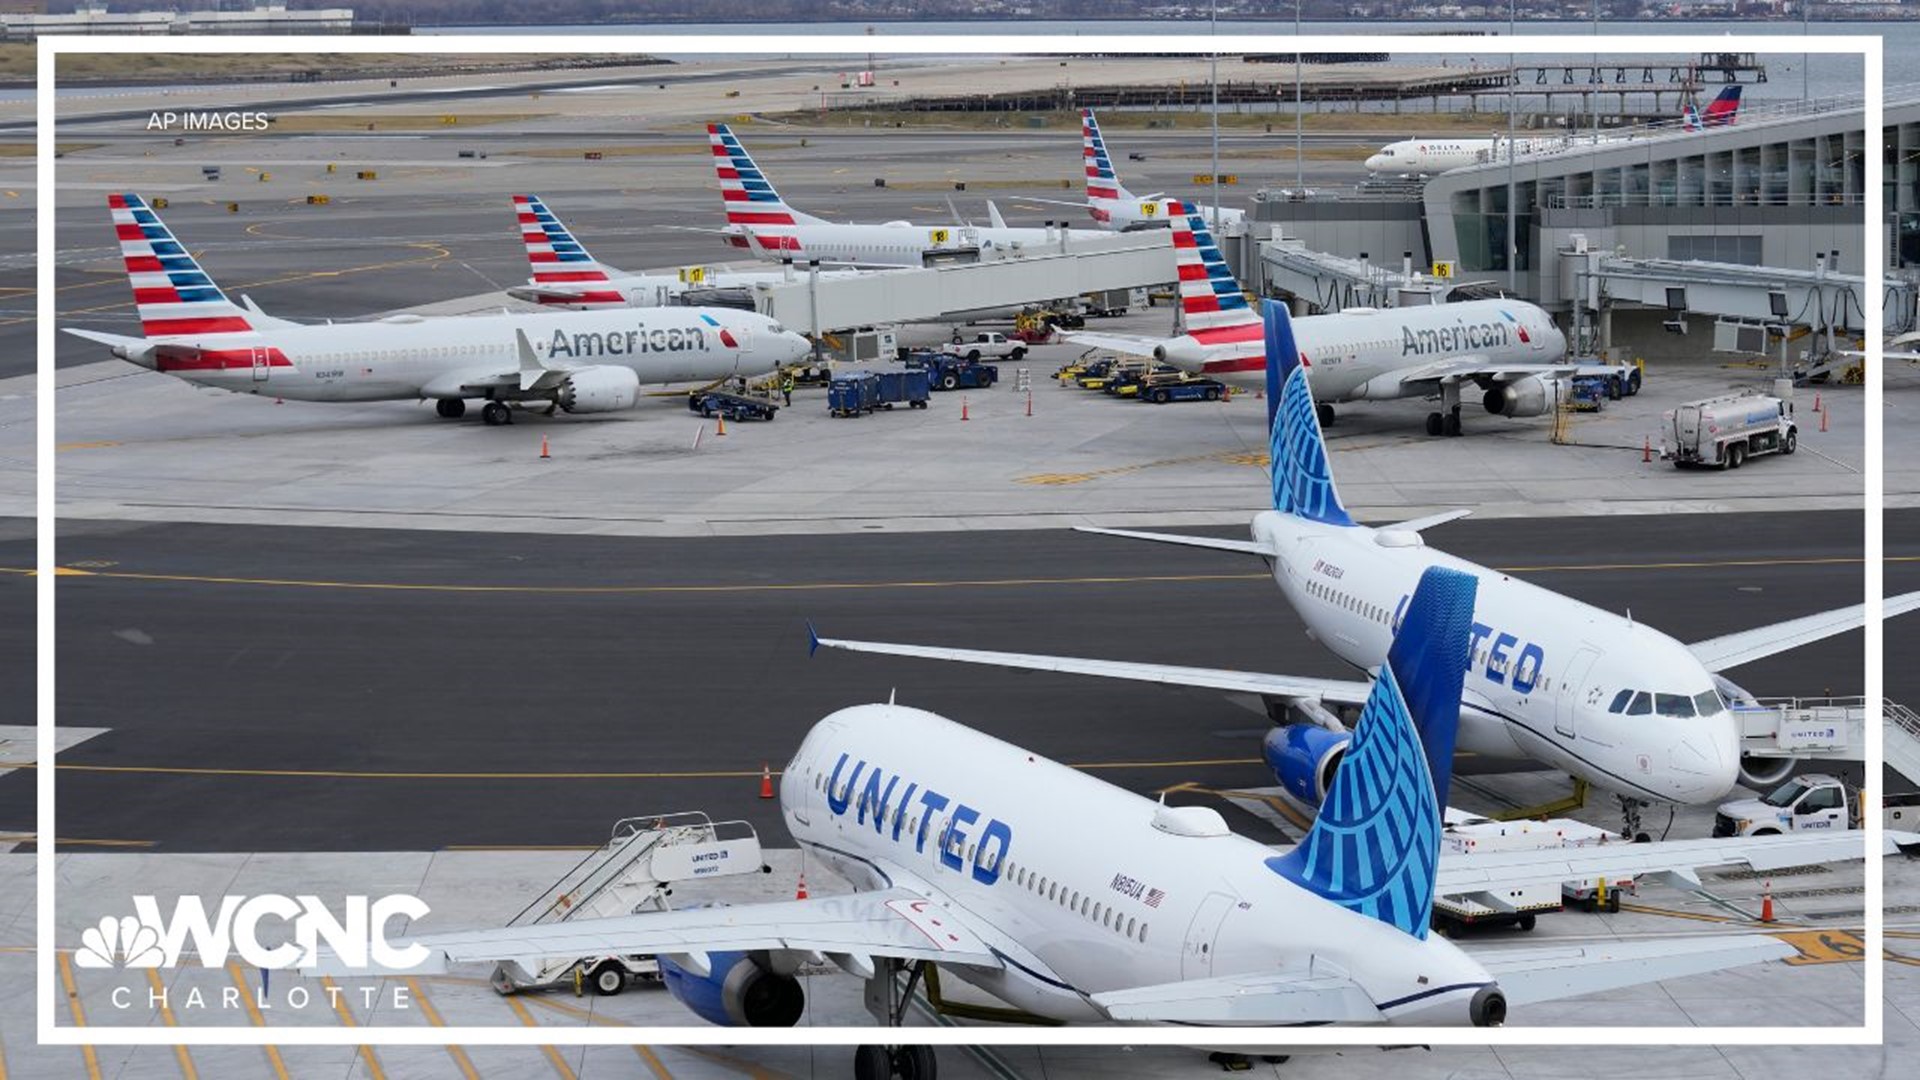 Some U.S. airlines are concerned about a plane shortage ahead of what experts say could be a record summer travel season.